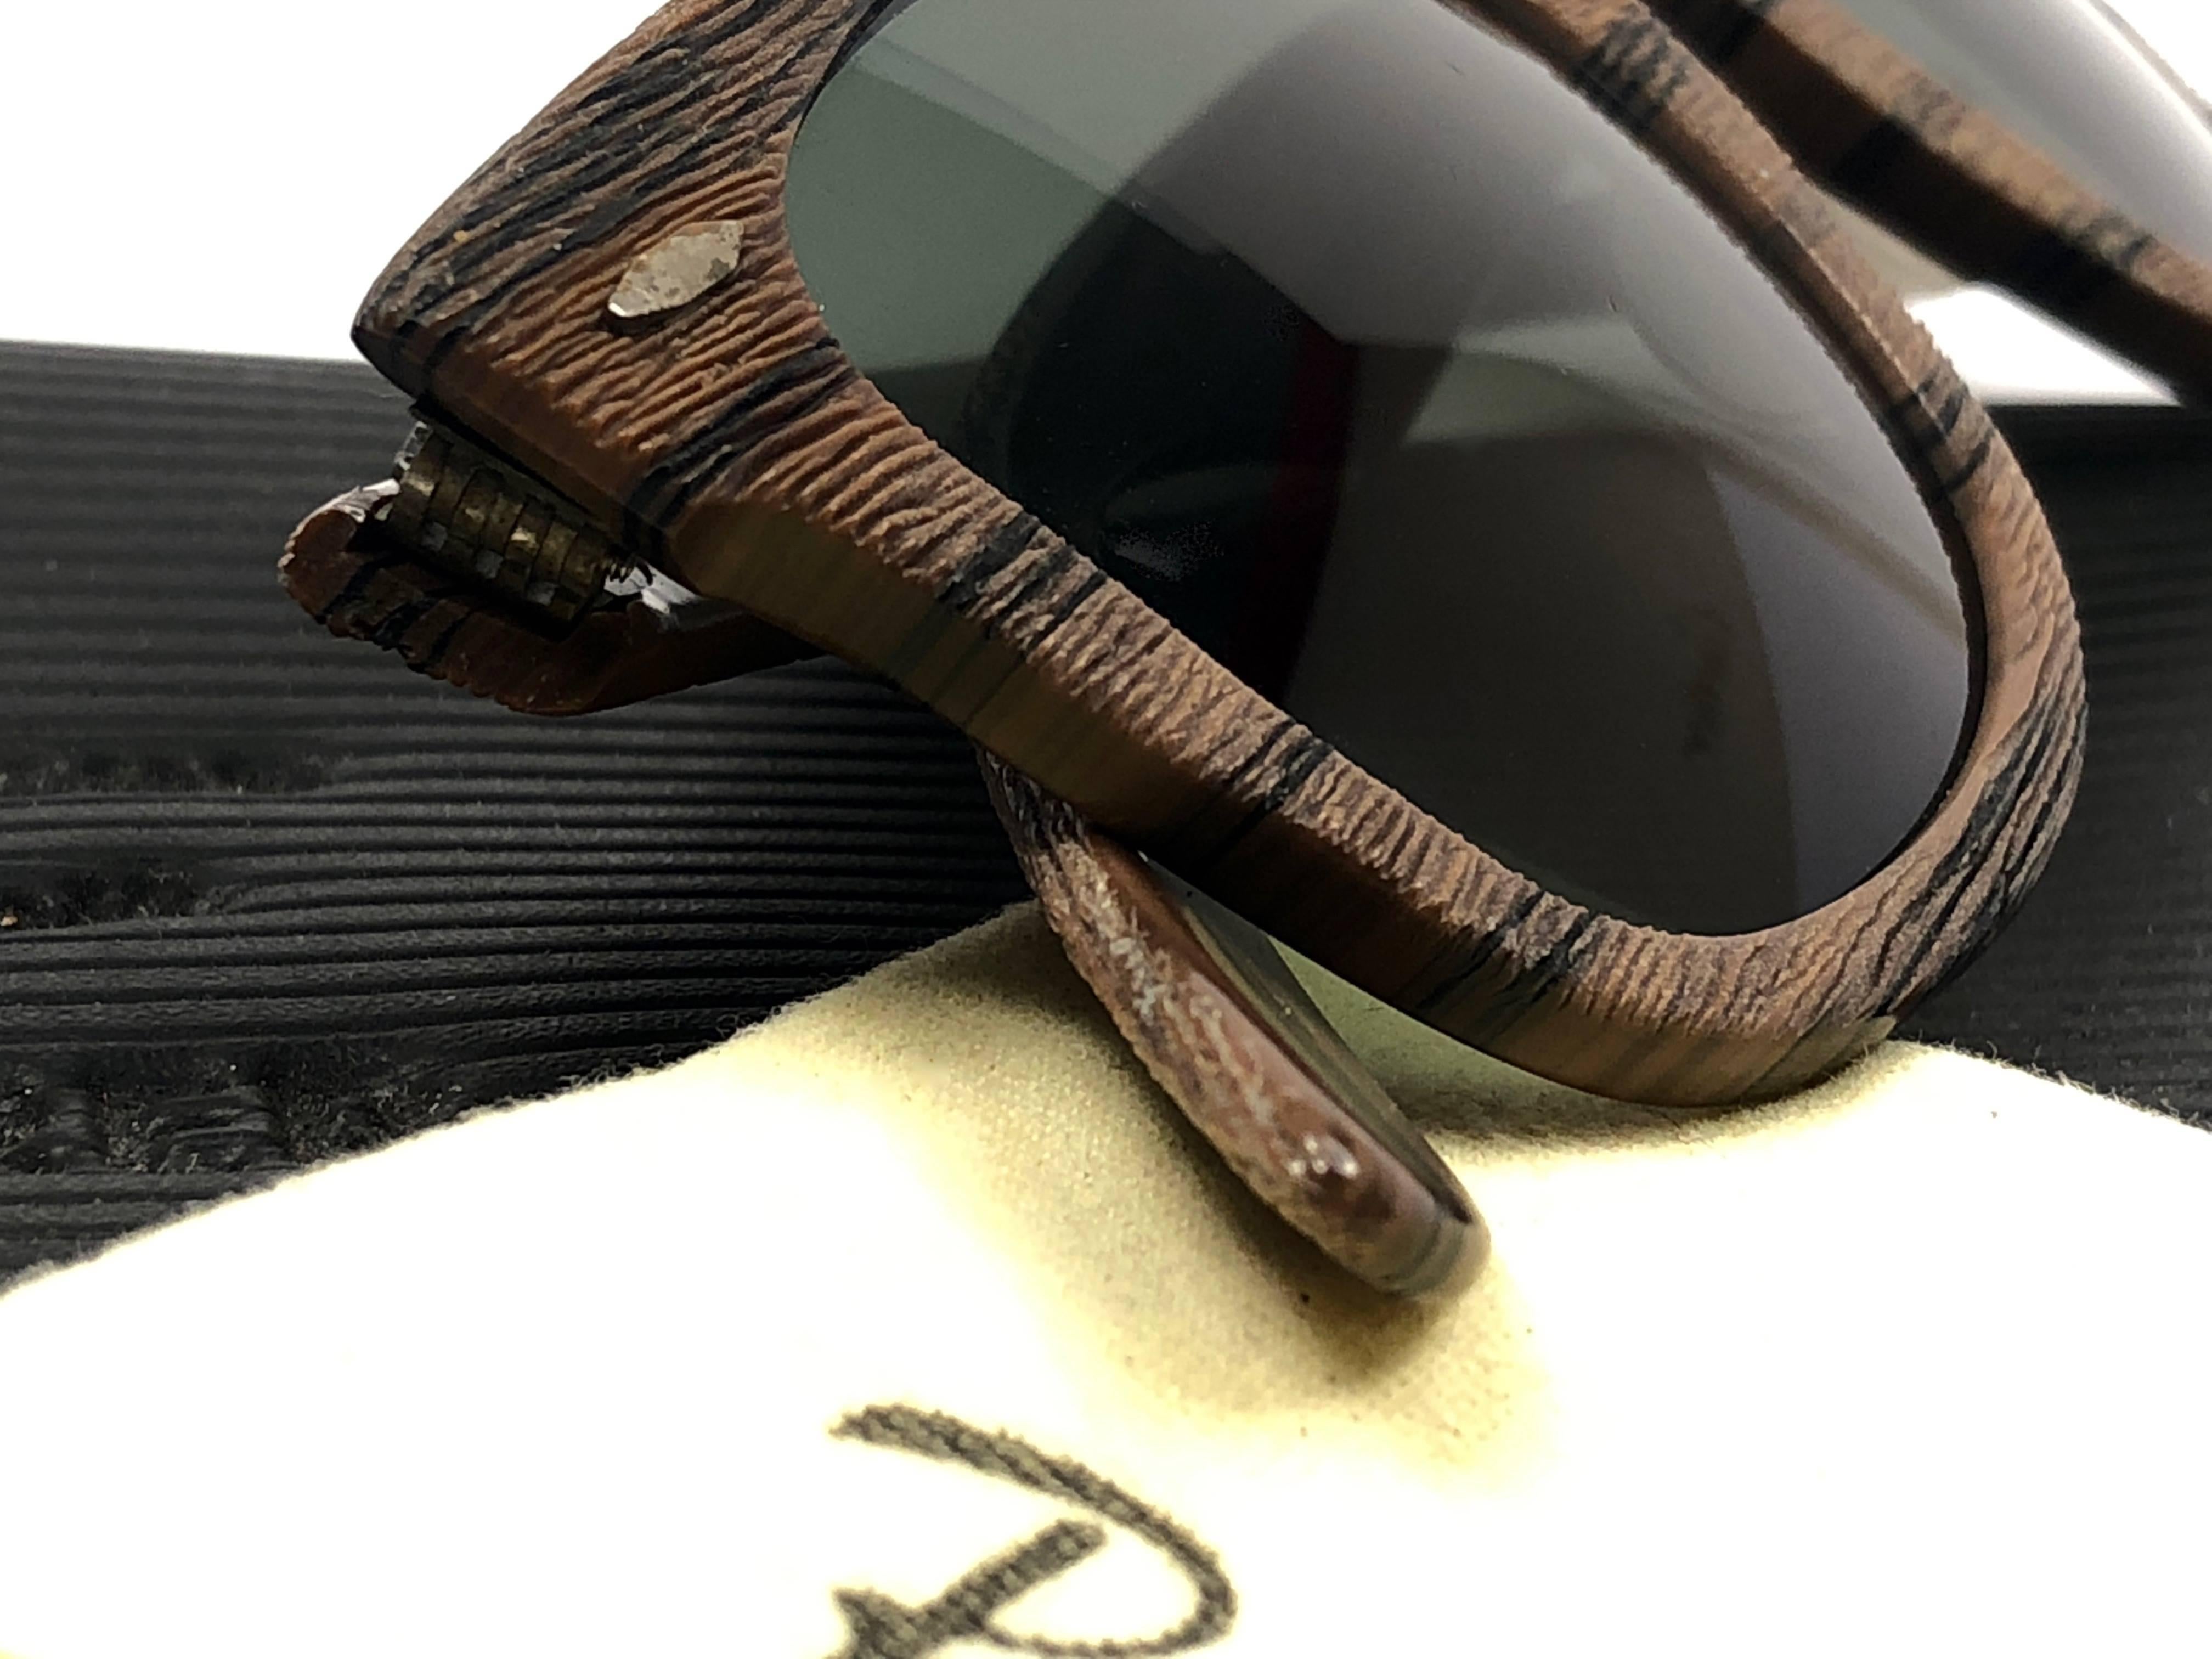 Ray Ban Wayfarer The Woodies Dark Tiki Edition USA Sunglasses, 1980s In New Condition In Baleares, Baleares